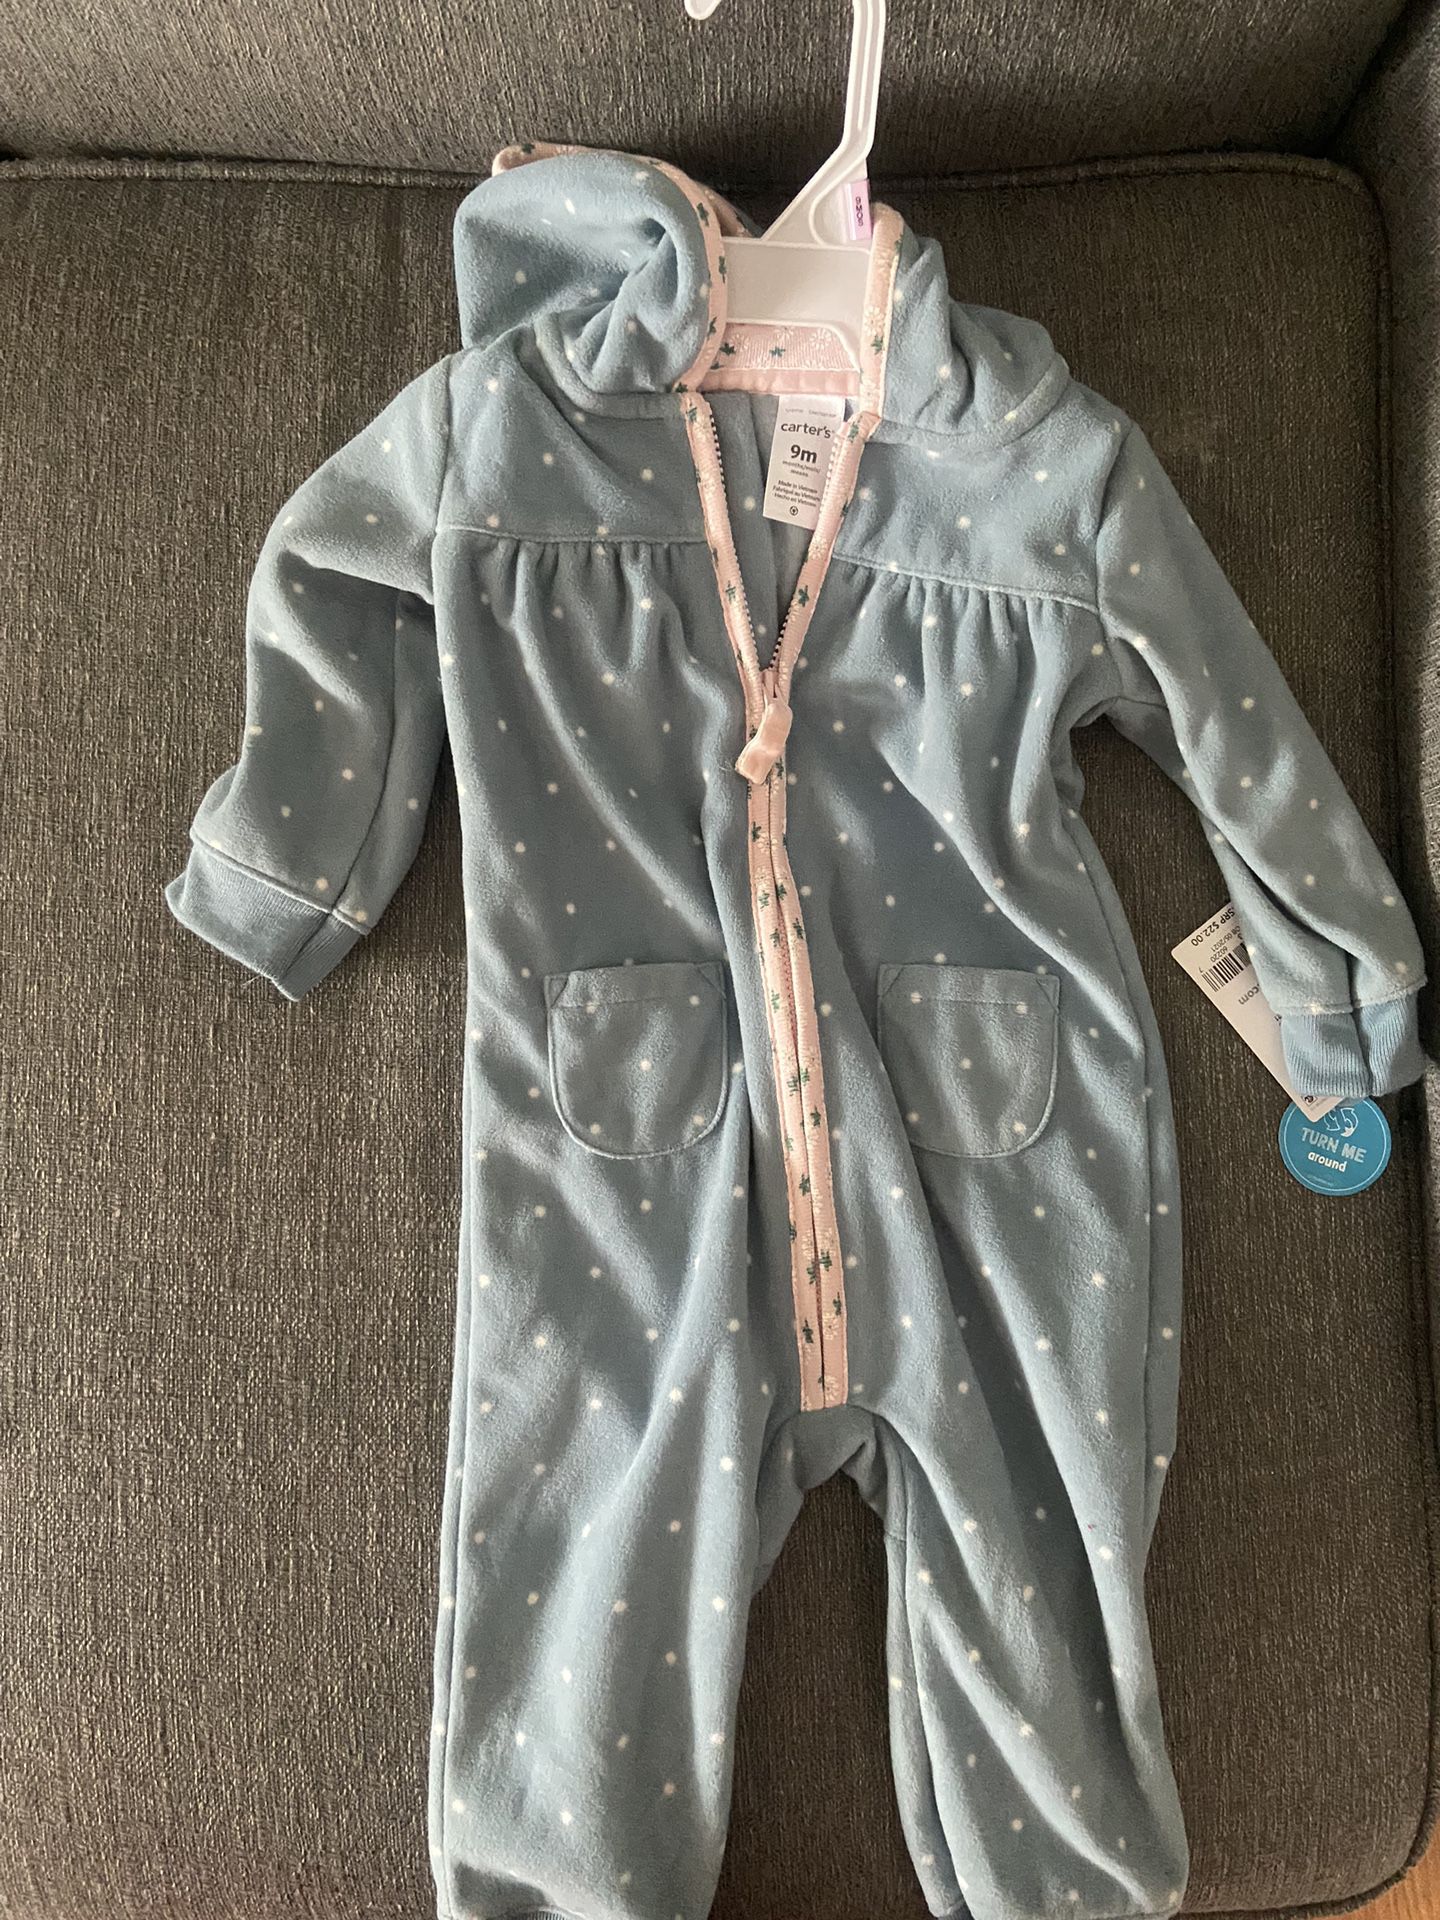 NWT Carters Babygirl Jumpsuit 9 Months 